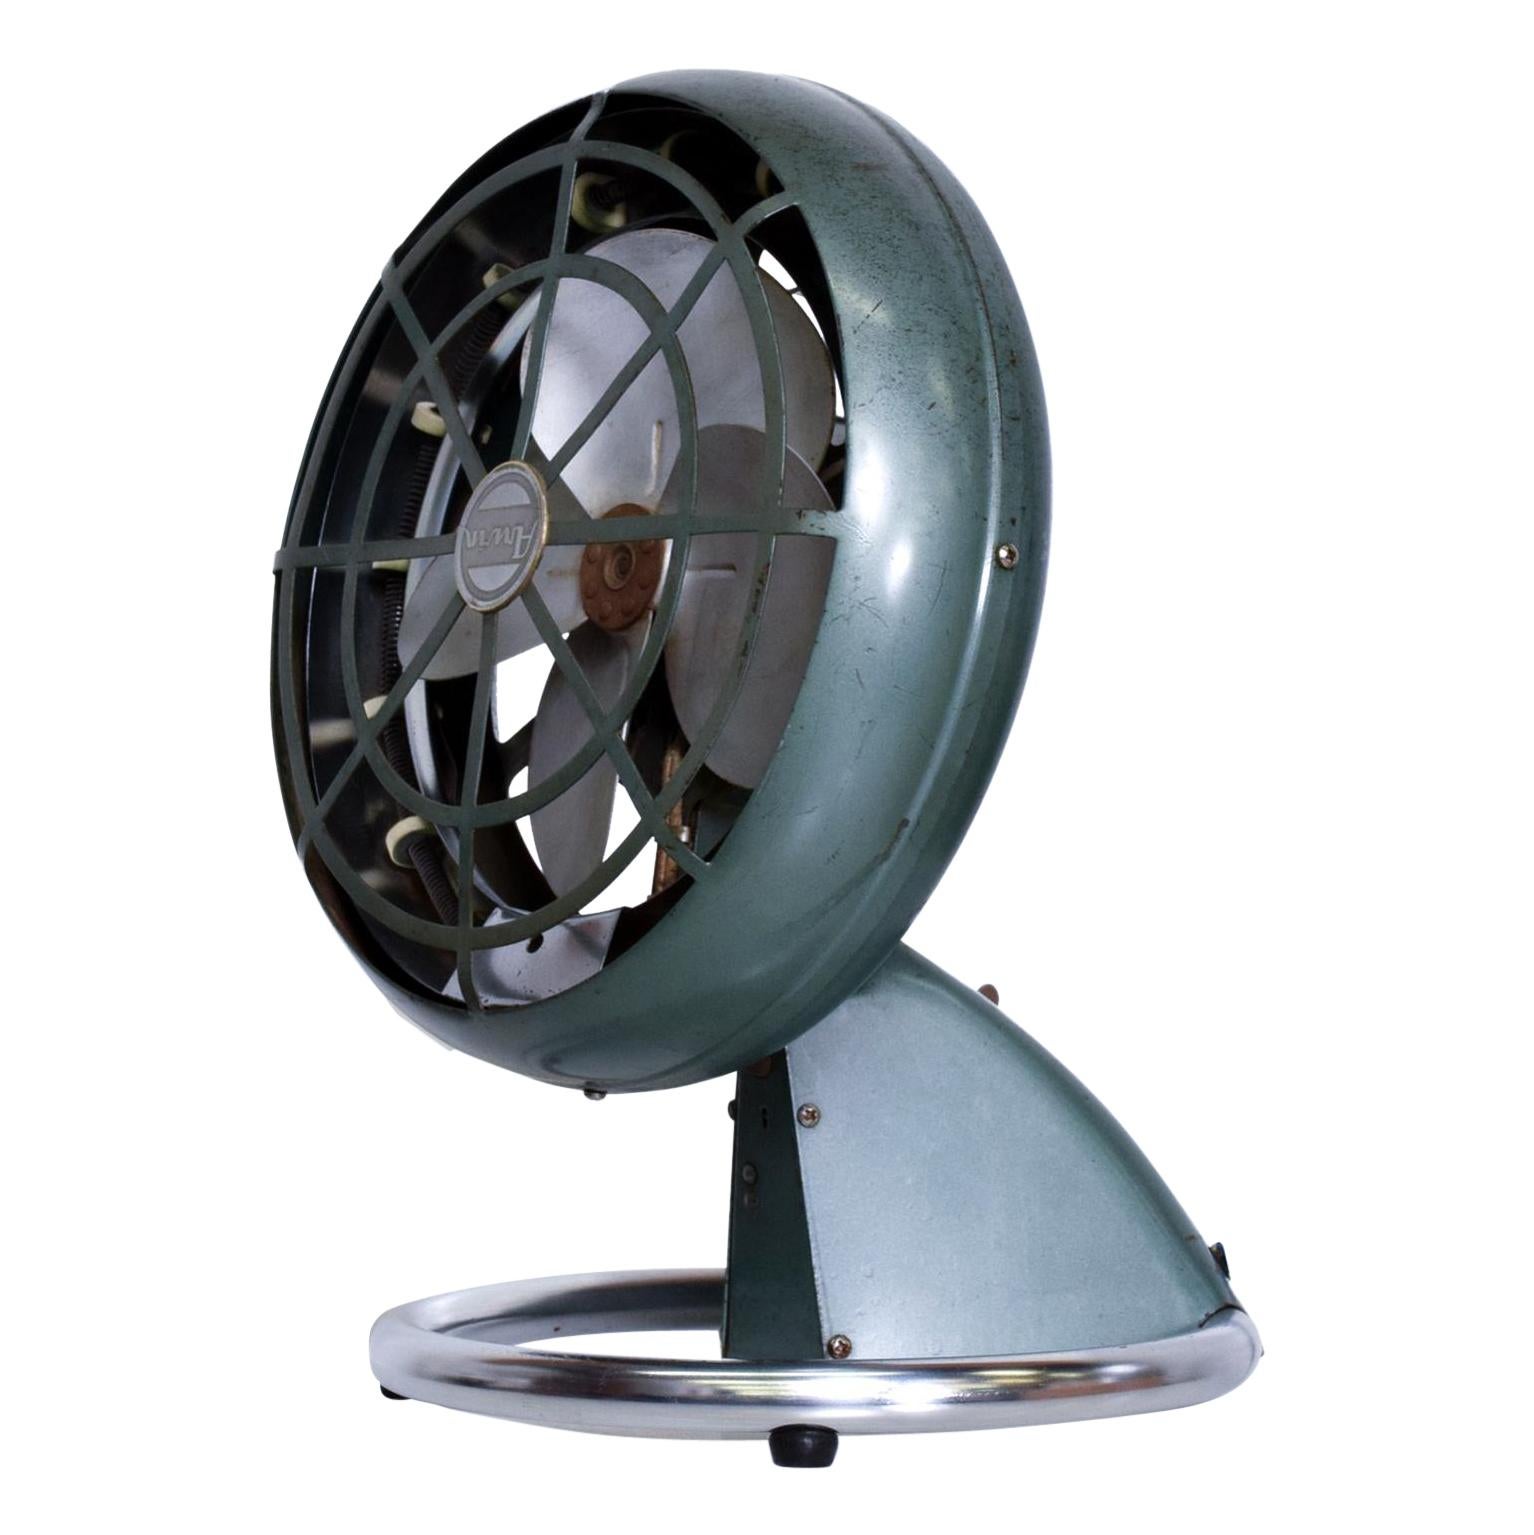 Electric Fans - 7 For Sale on 1stDibs